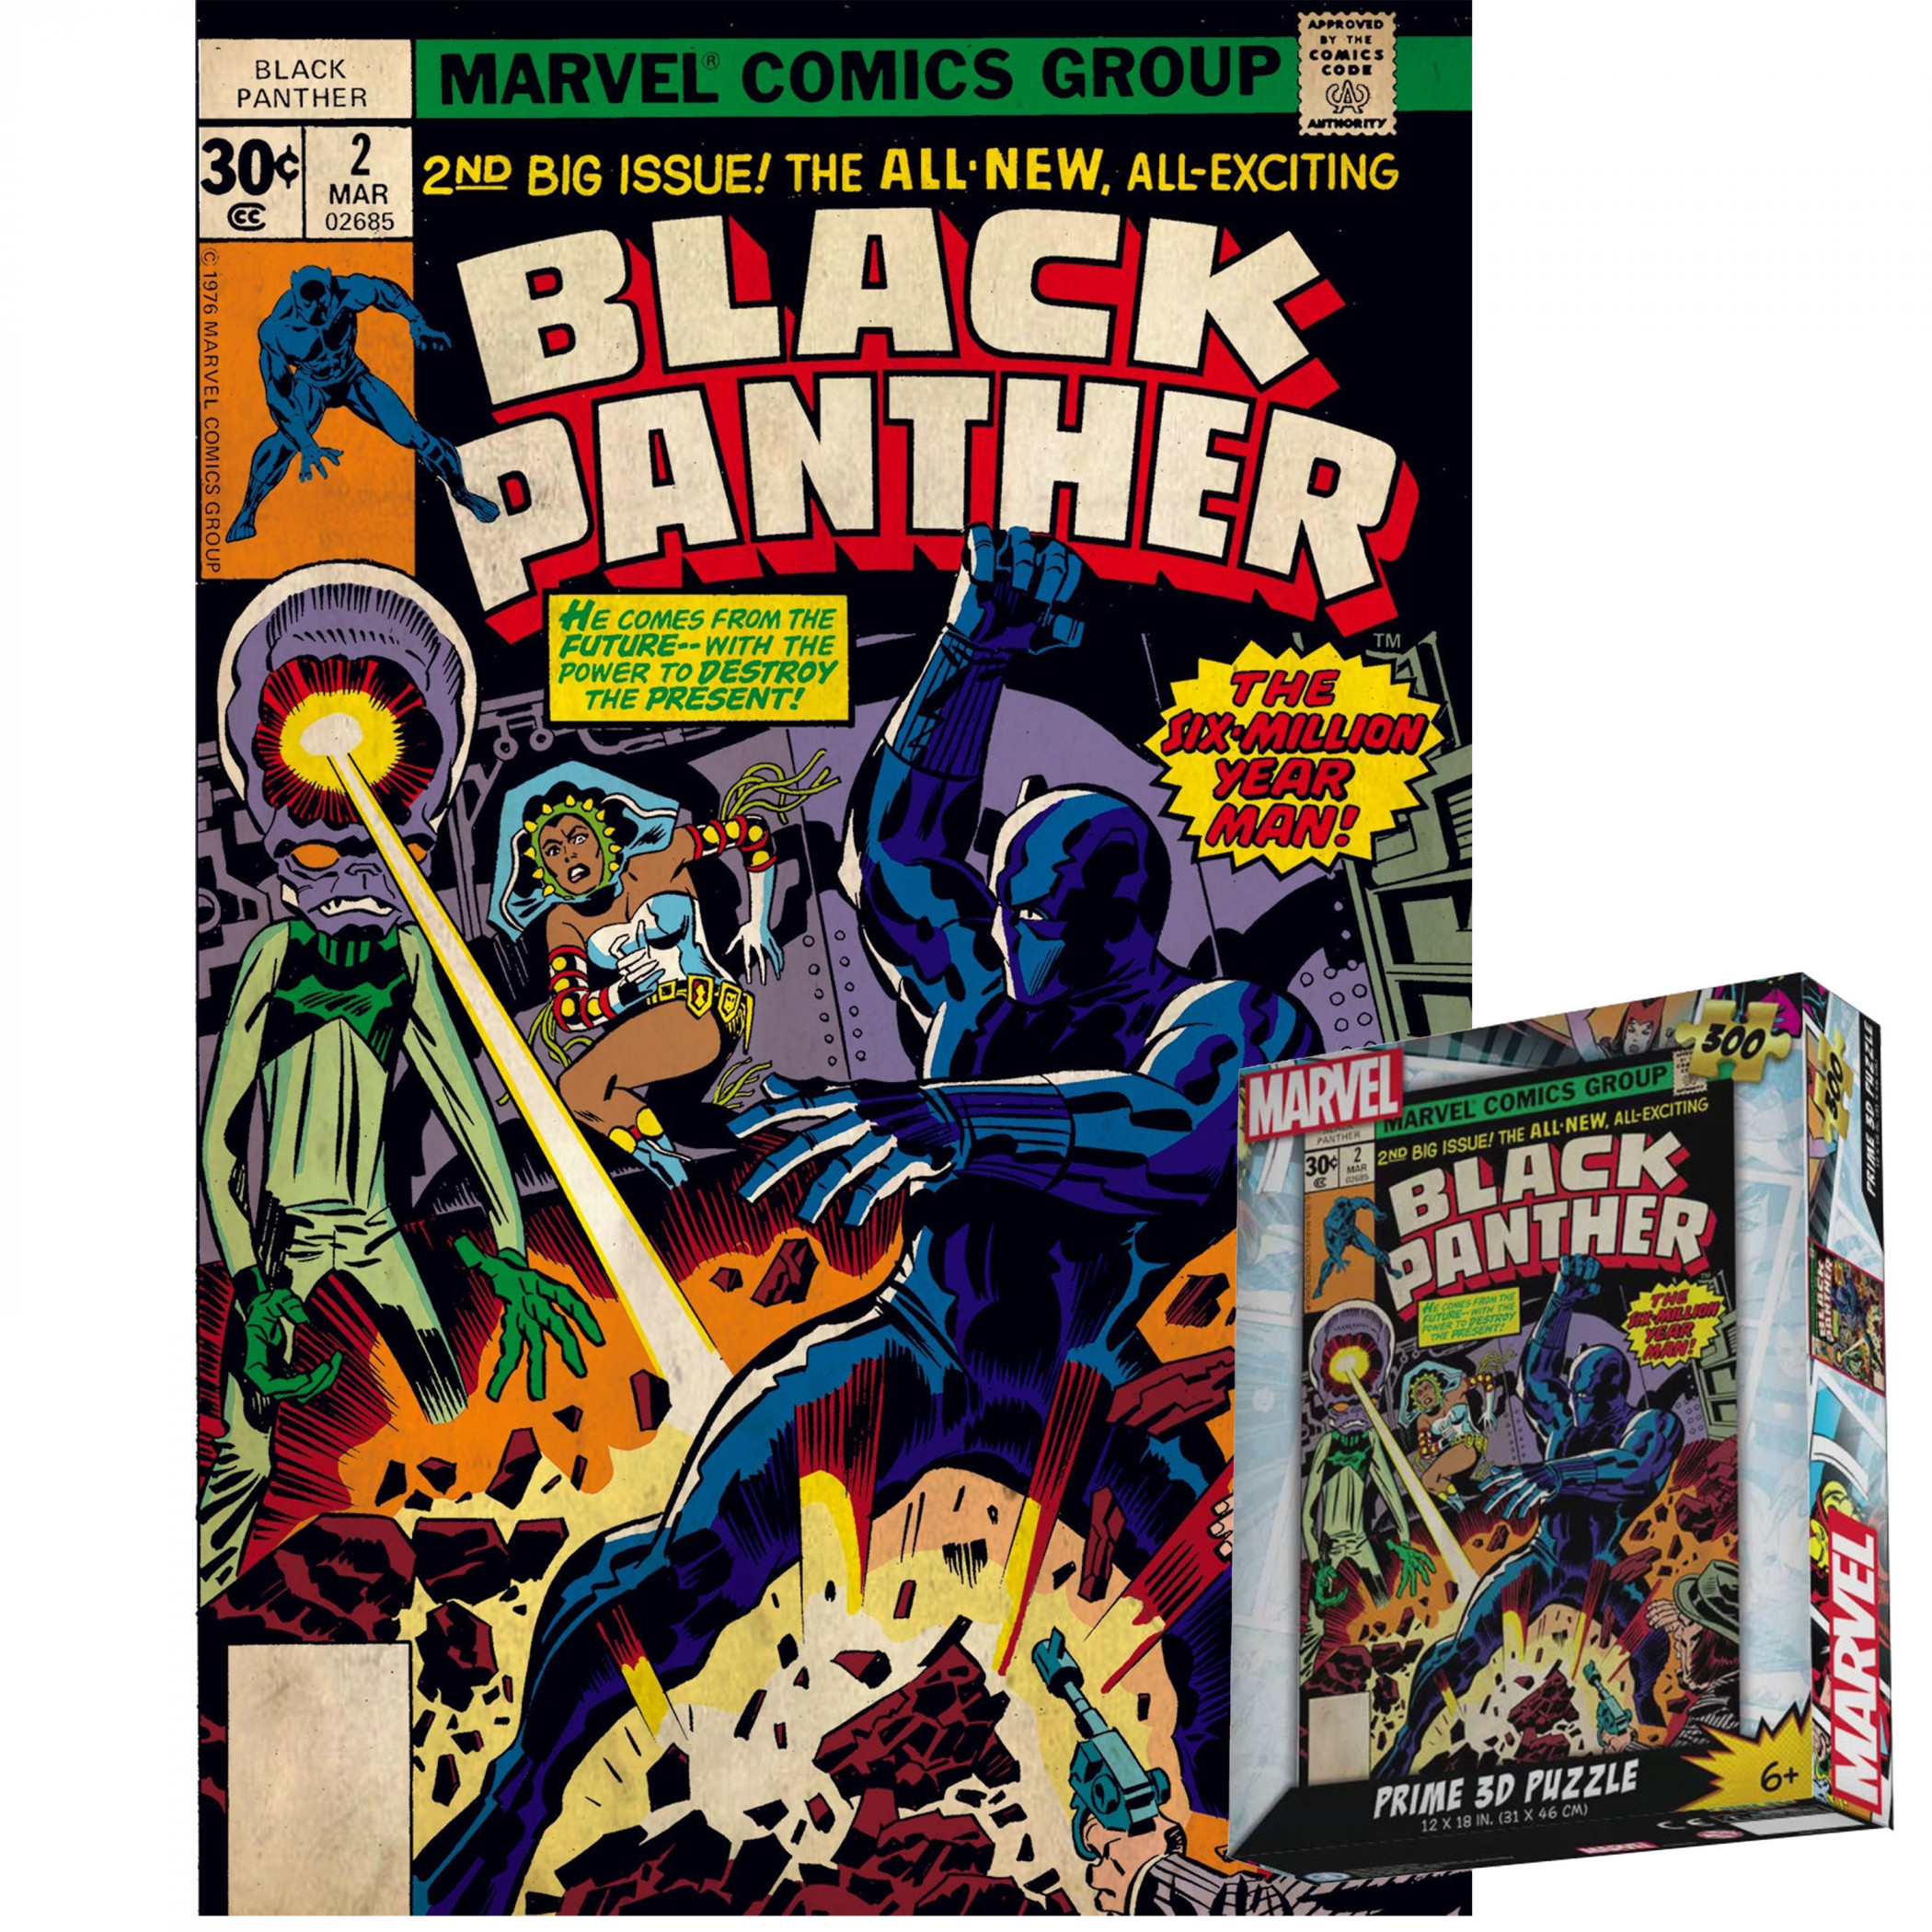 Black Panther #2 3D Lenticular 300pc Jigsaw Puzzle